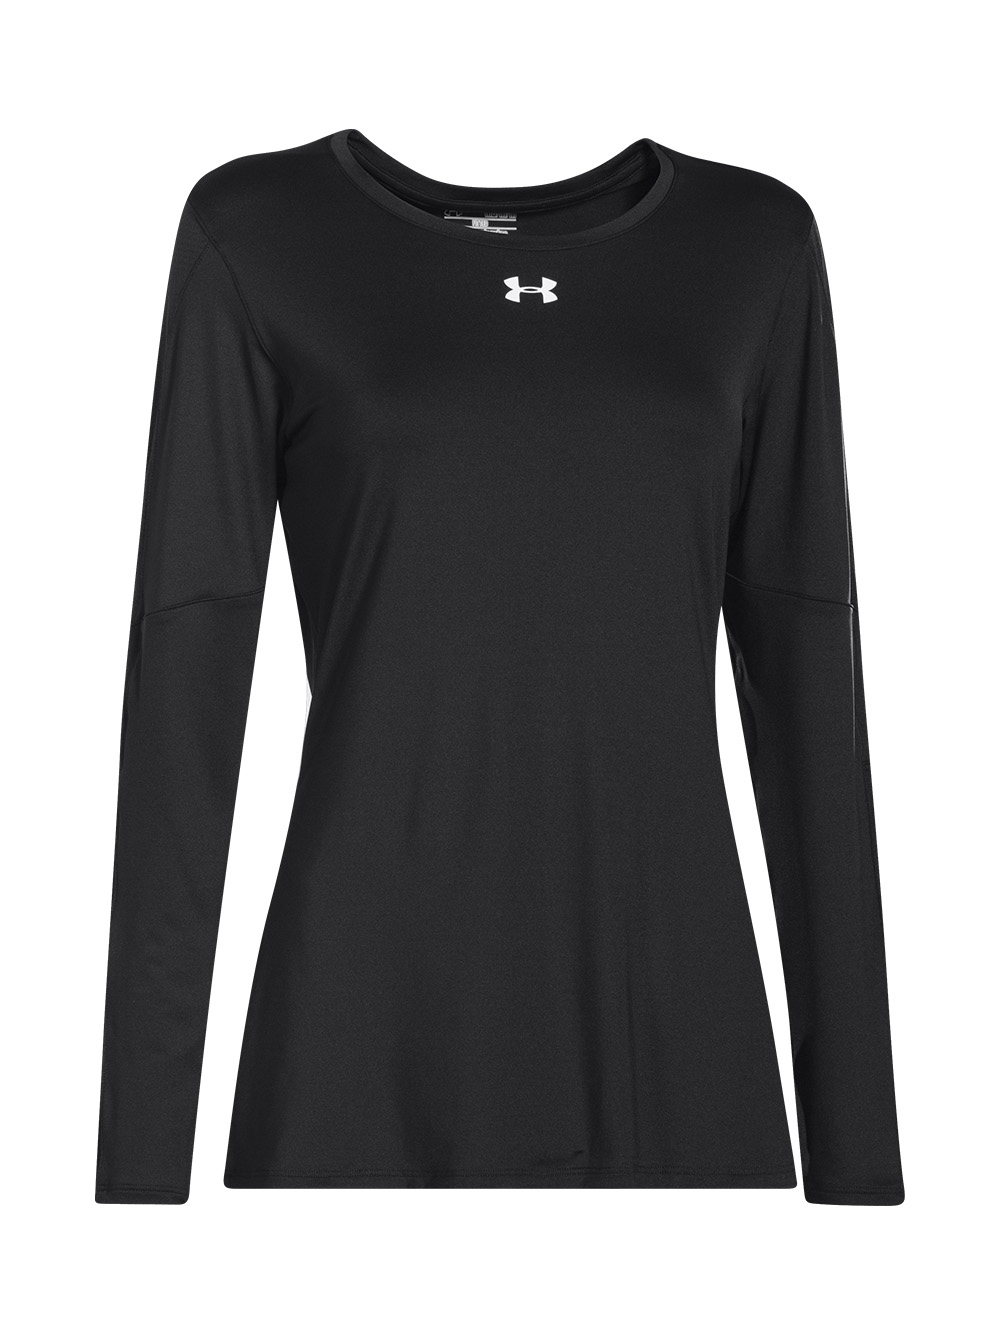 UA Block Party Longsleeve Jersey - Black | Midwest Volleyball Warehouse